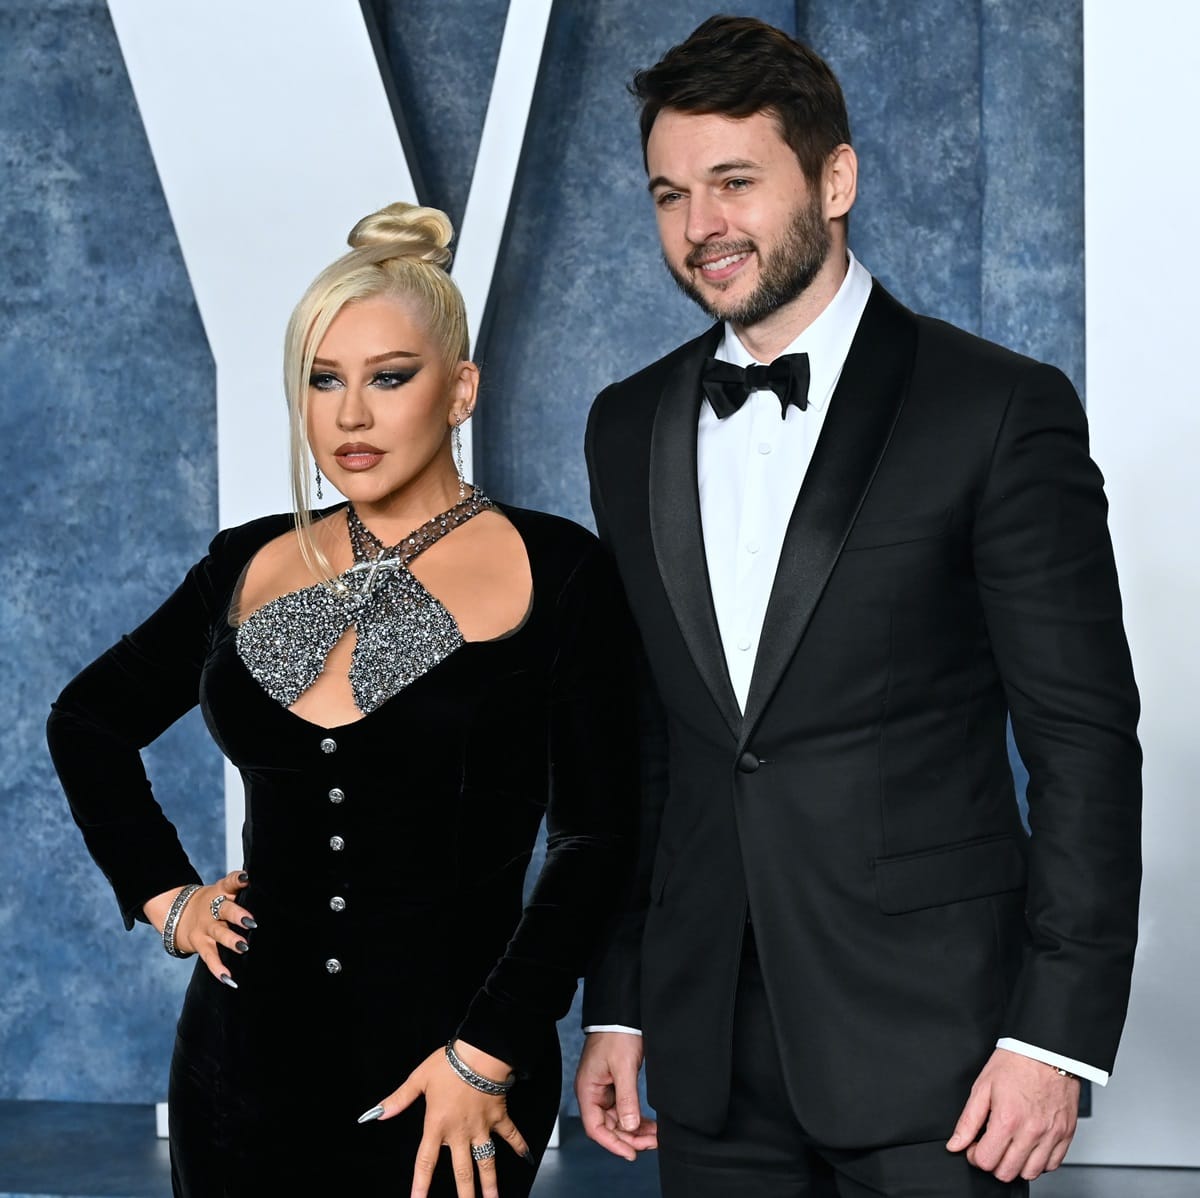 Christina Aguilera and her fiancé Matthew Rutler, who first met on the set of the 2010 film Burlesque while Aguilera was going through a divorce with her ex-husband Jordan Bratman, are in no hurry to marry